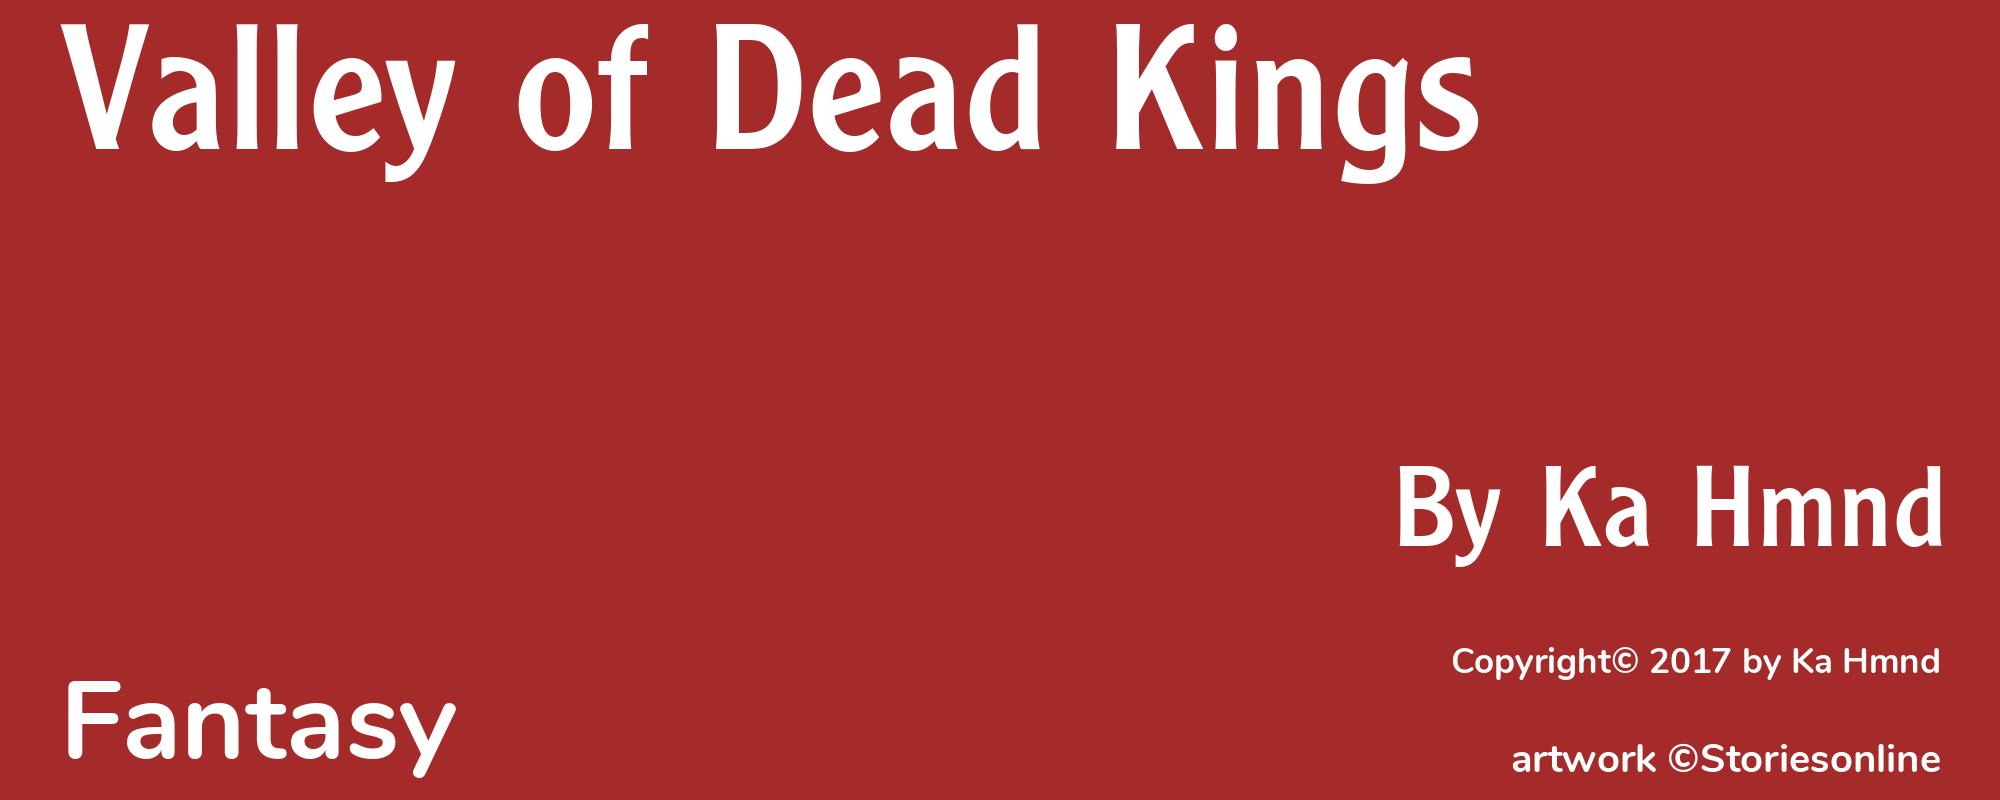 Valley of Dead Kings - Cover